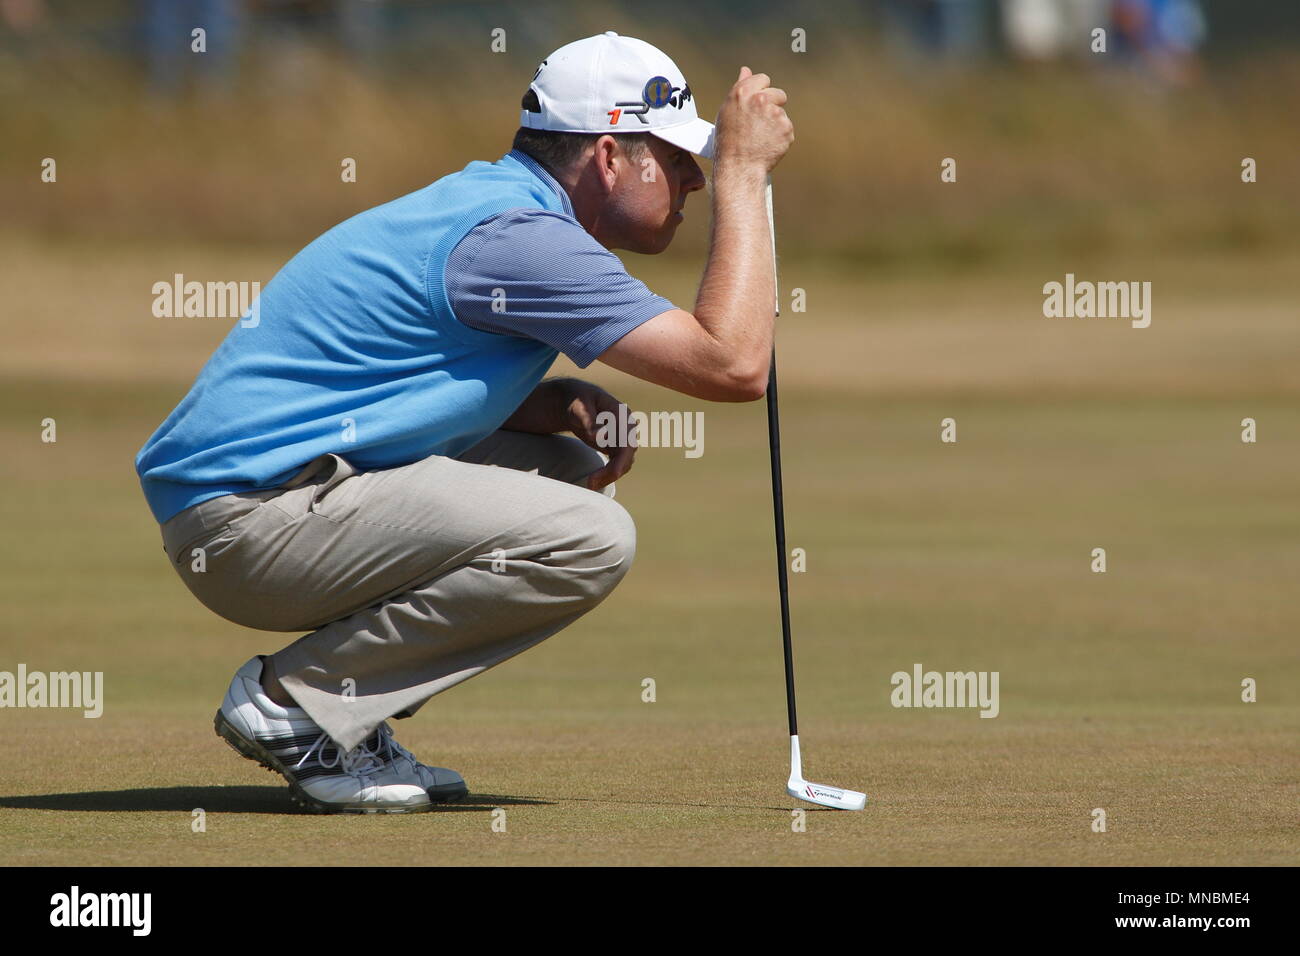 MUIRFIELD, SCOTLAND - JULY 20: Justin Leonard studying his putt at the 1st green during the third round of The Open Championship 2013 at Muirfield Golf Club on July 20, 2013 in Scotland. Stock Photo